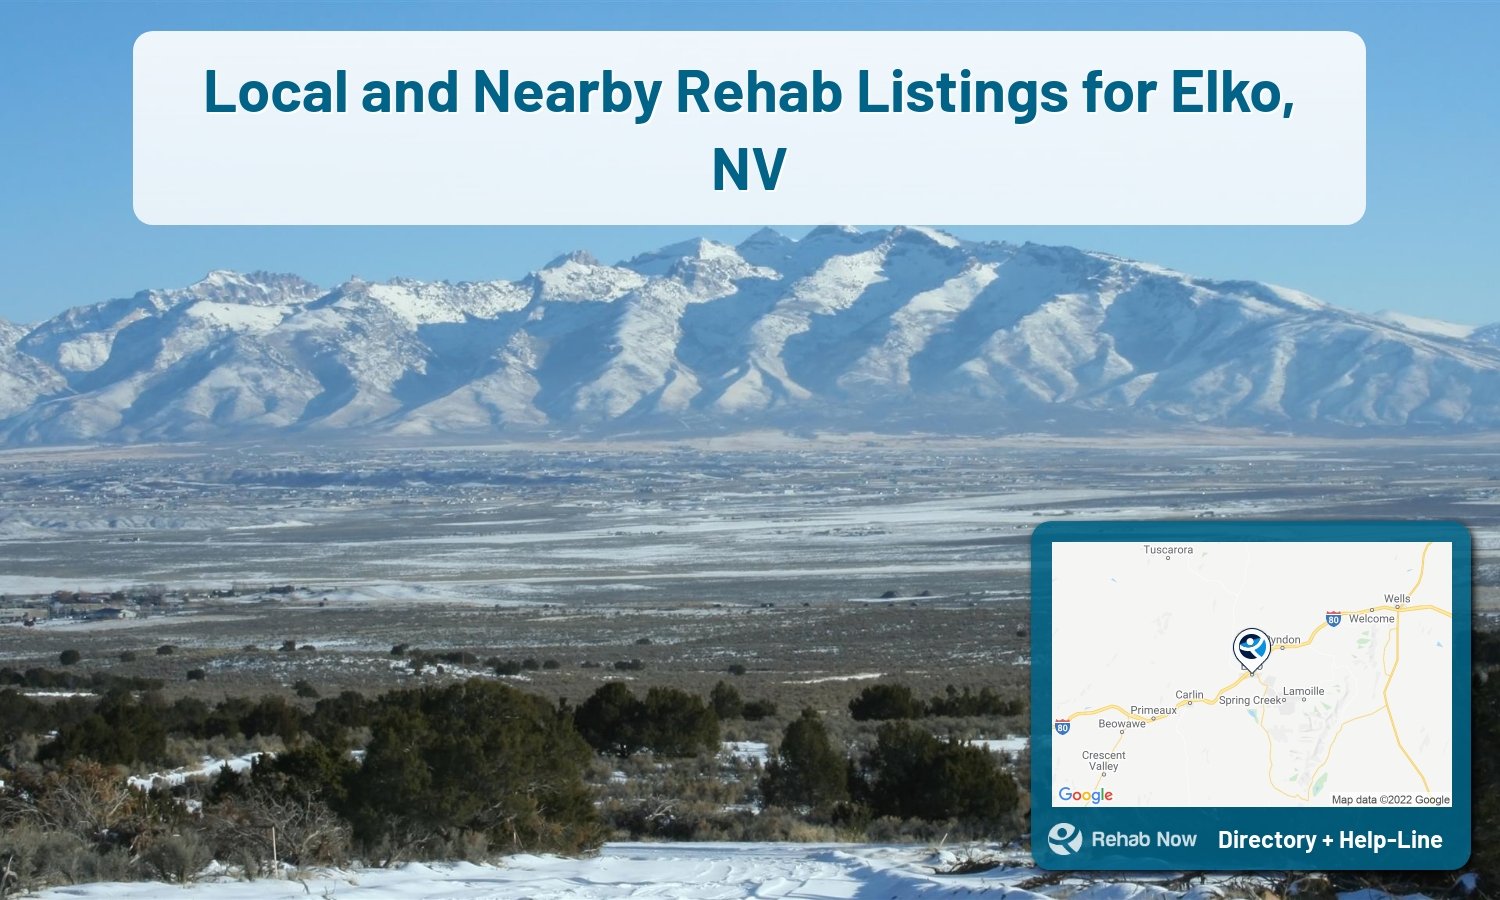 Let our expert counselors help find the best addiction treatment in Elko, Nevada now with a free call to our hotline.